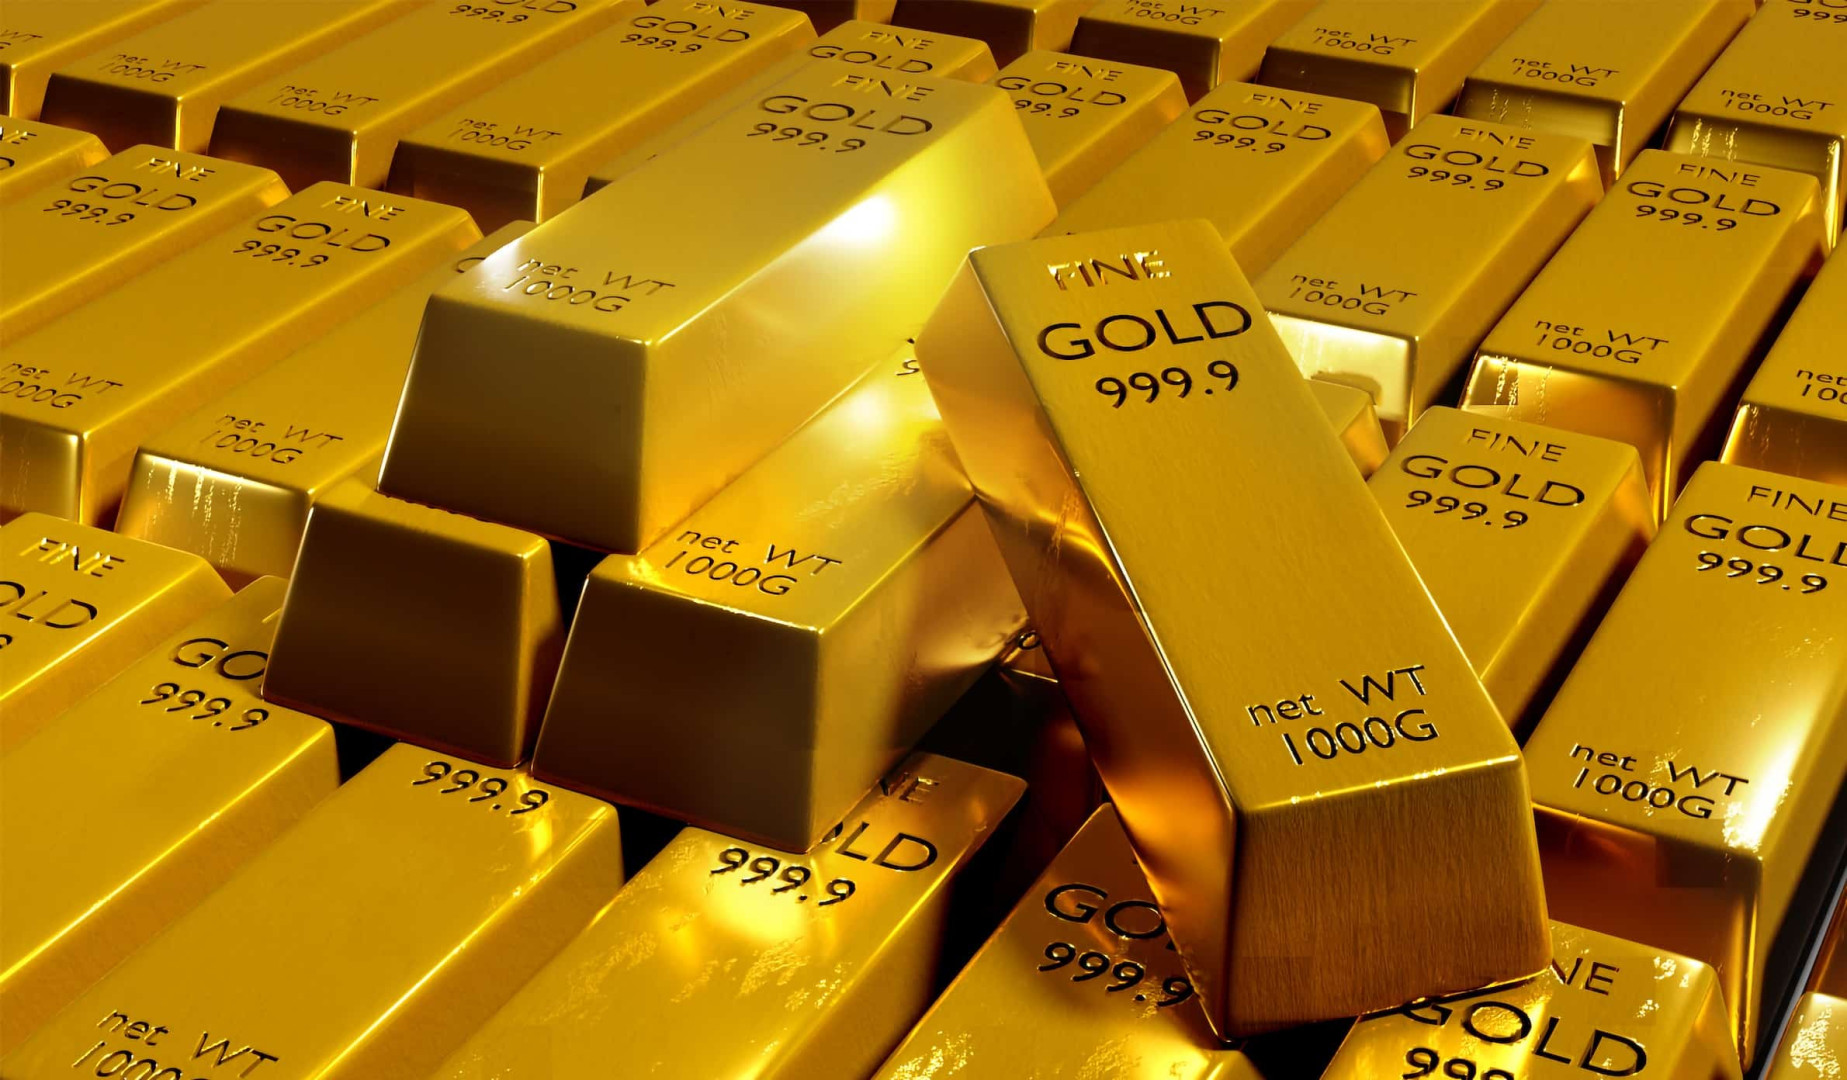 Iraq and 4 Arab countries possess more than one million tons of global gold reserves